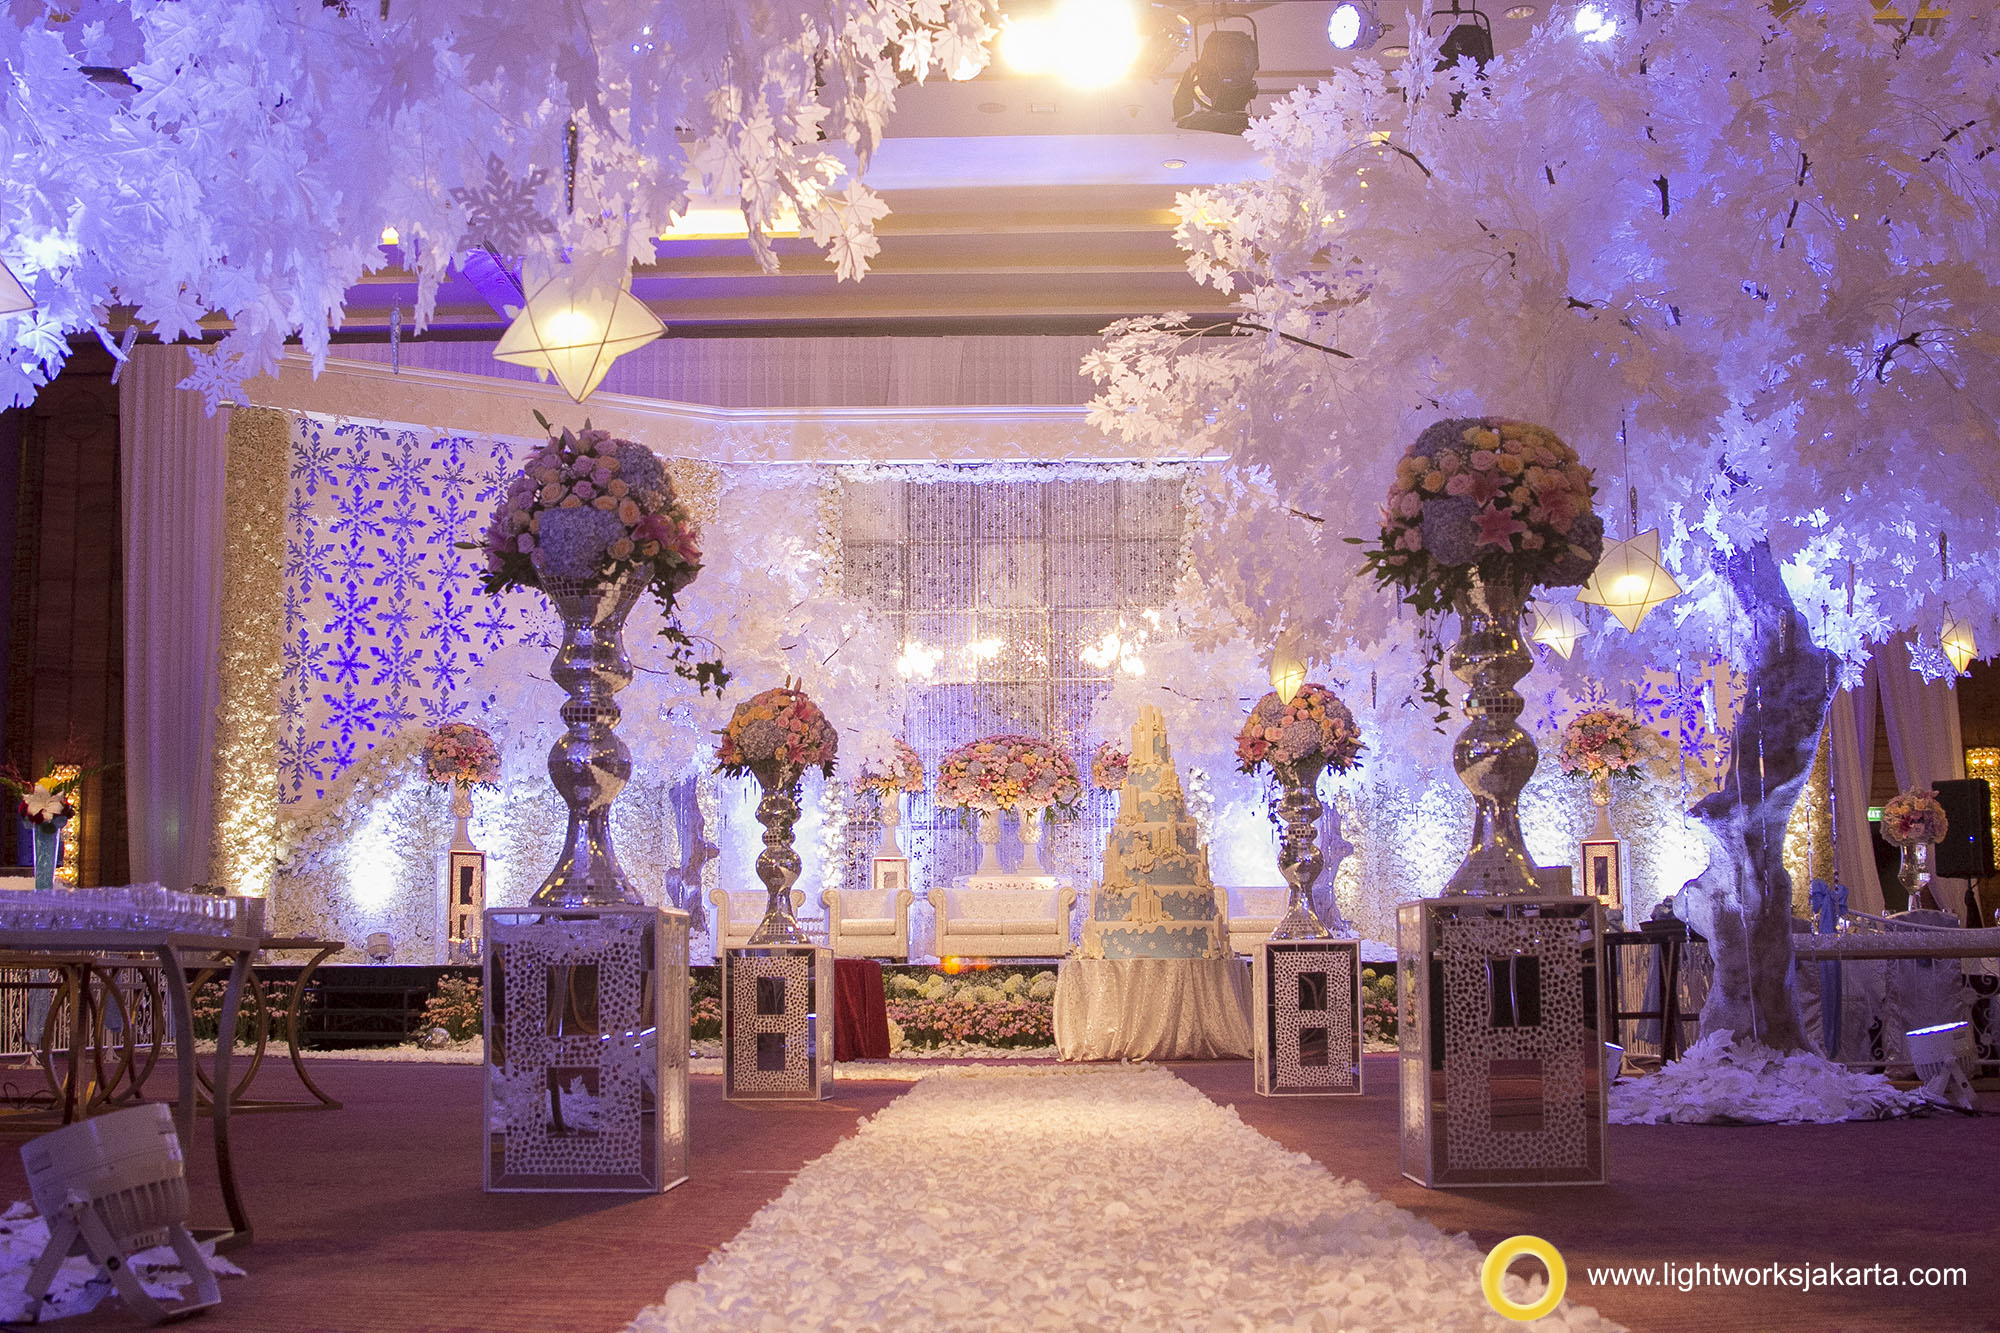 Hubert and Livia's Wedding Reception; Venue at Pullman Central Park Hotel; Decorated by Grasida Decoration; Lighting by Lightworks